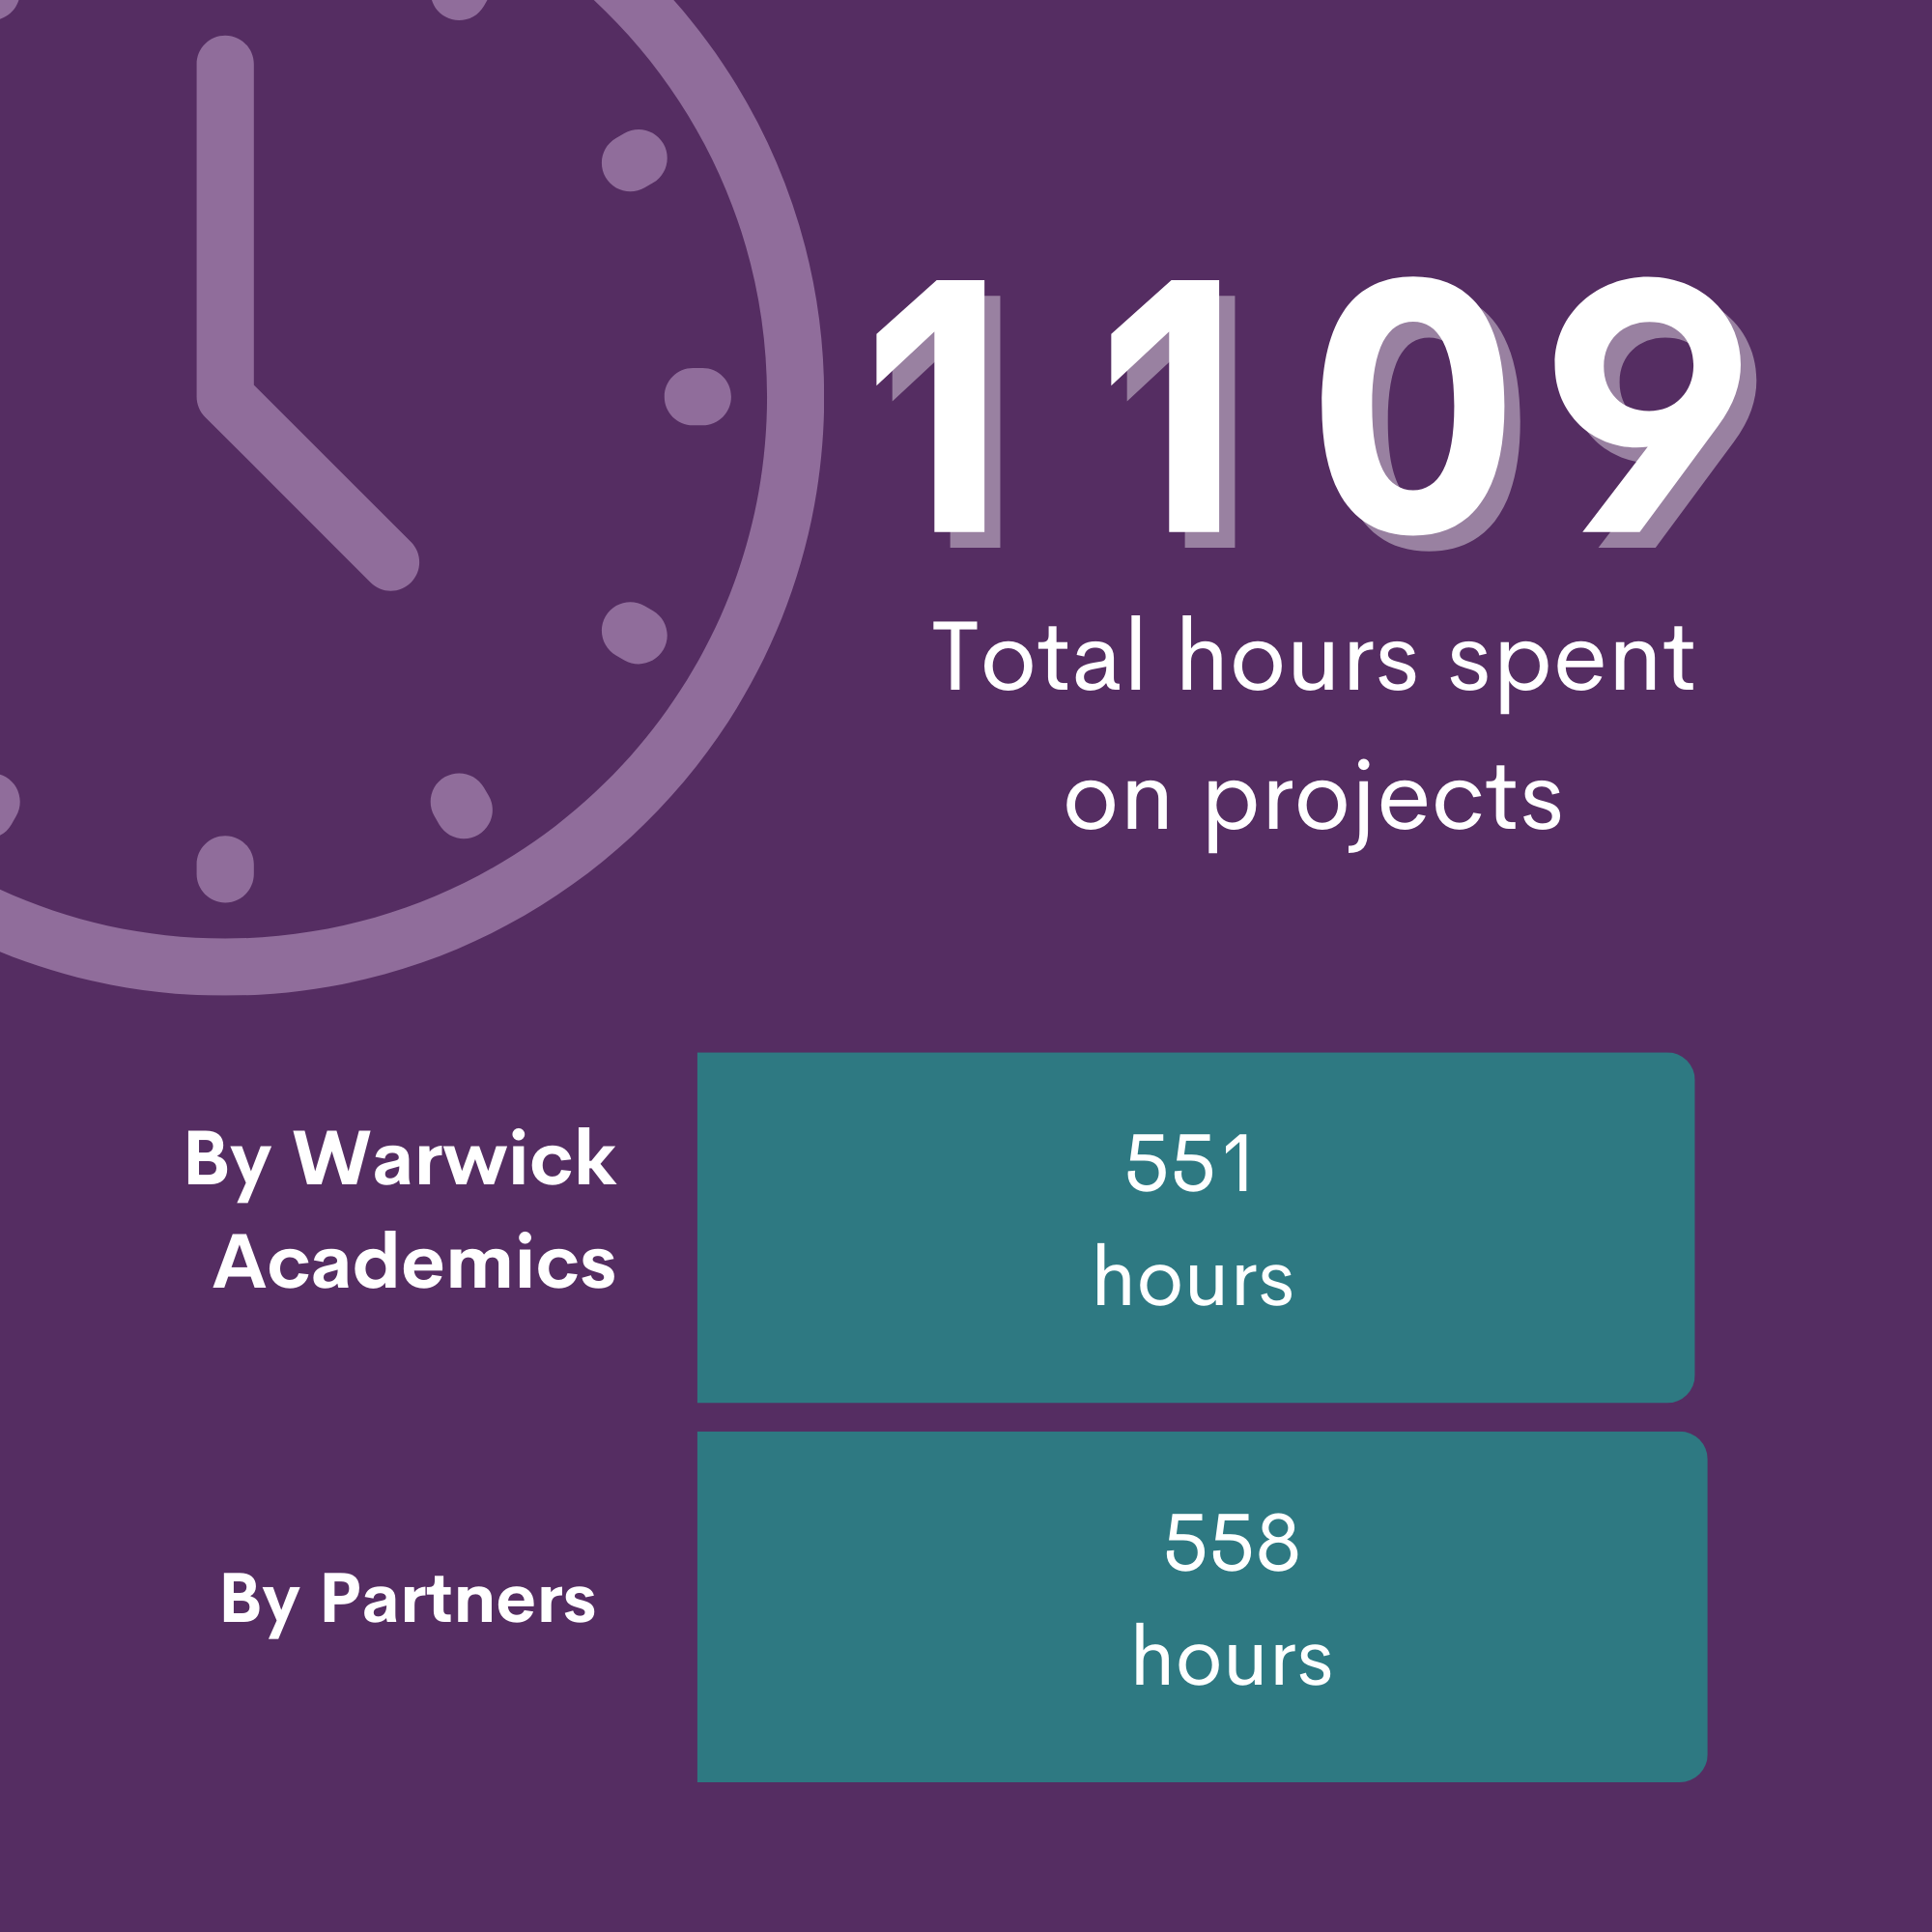 1109 total time spent on projects 551 for Warwick staff, 558 for partners